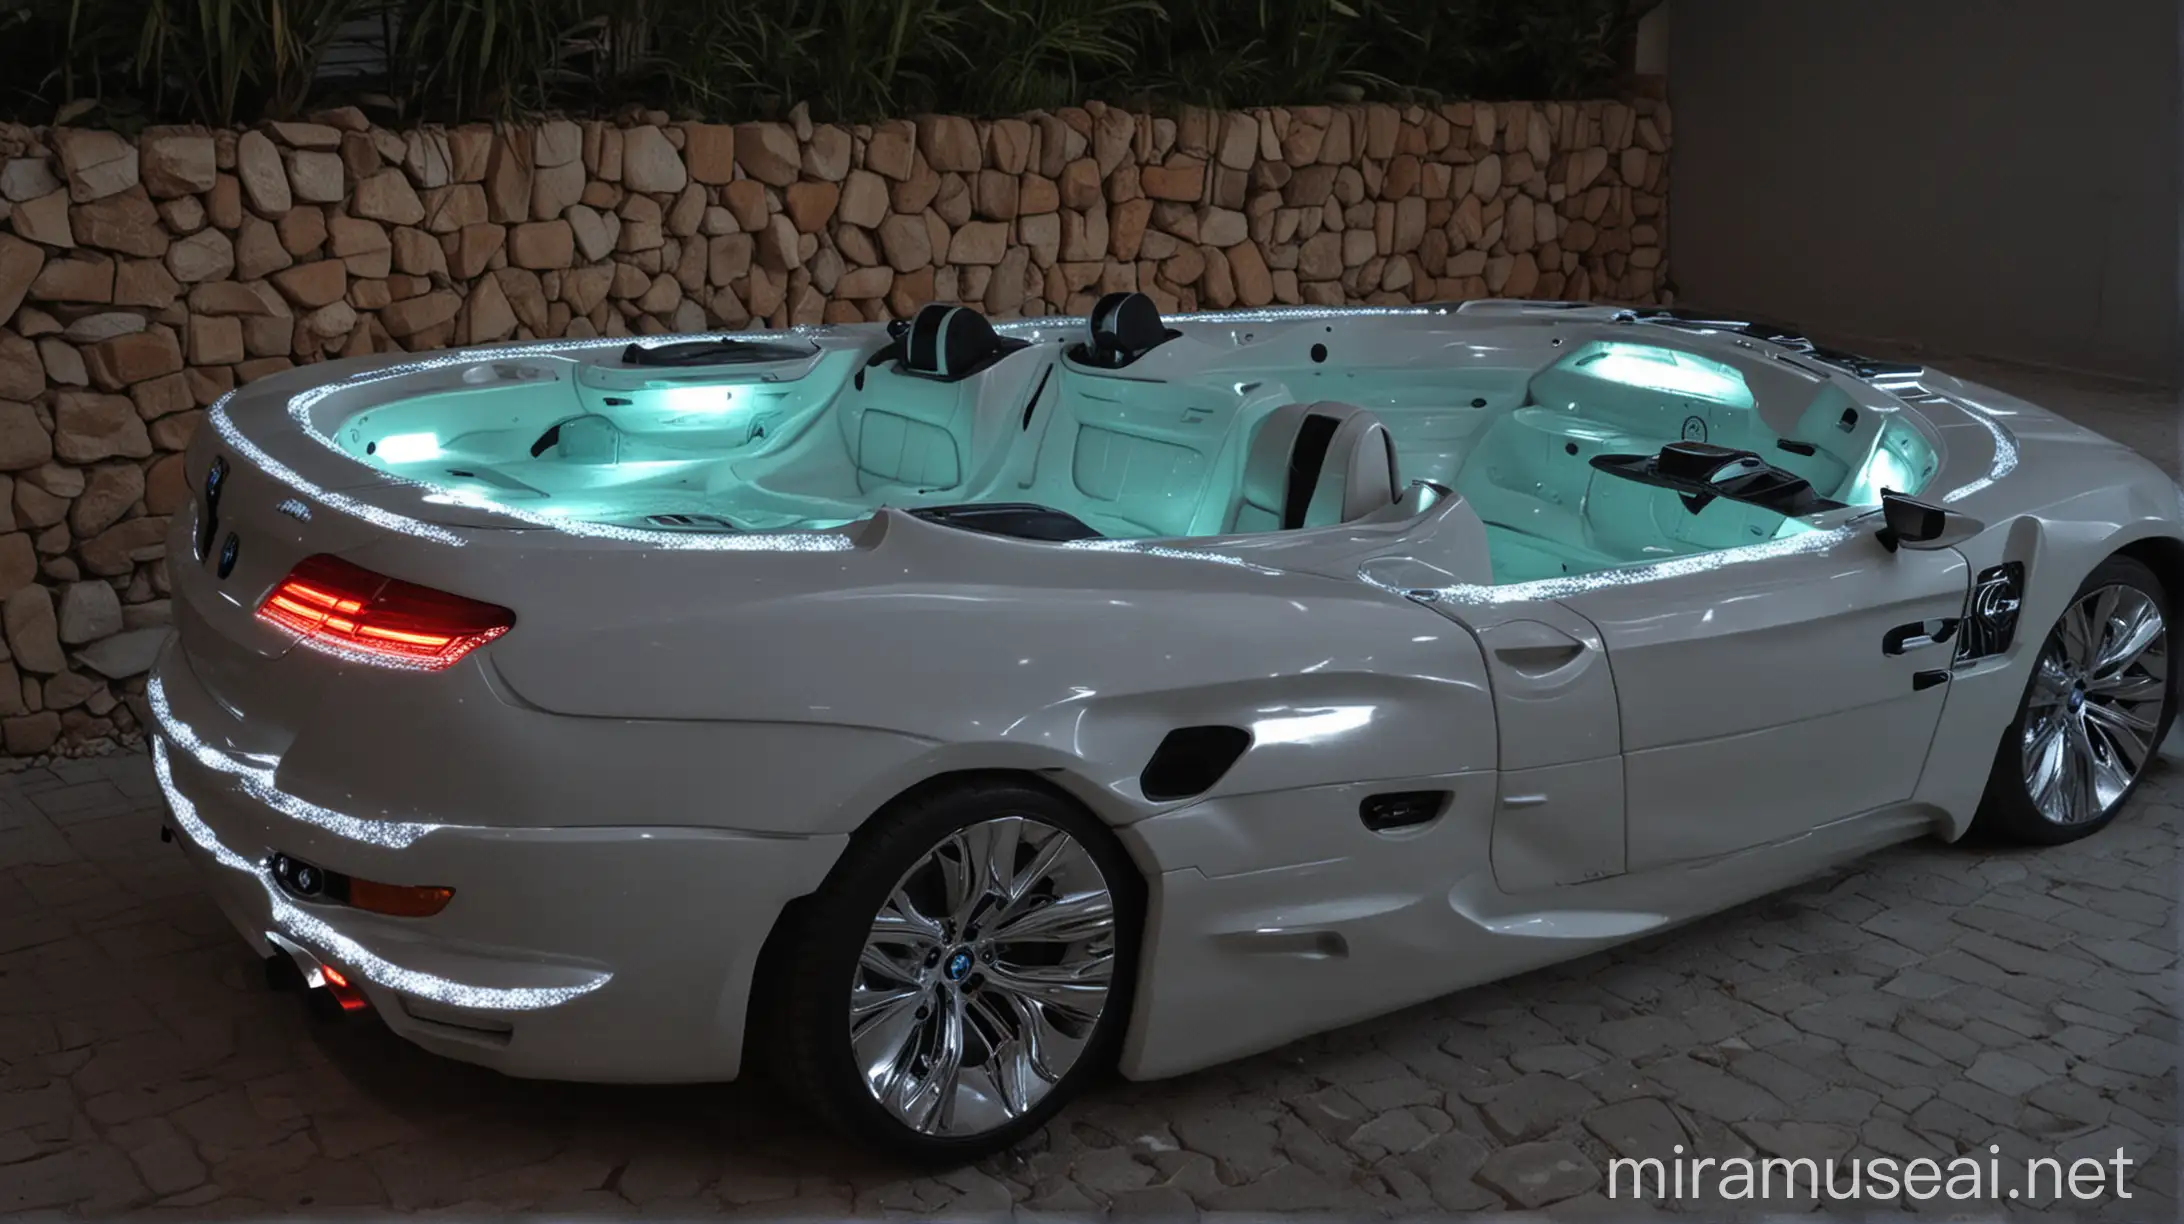 Jacuzzi in the shape of a bmw car with headlights on